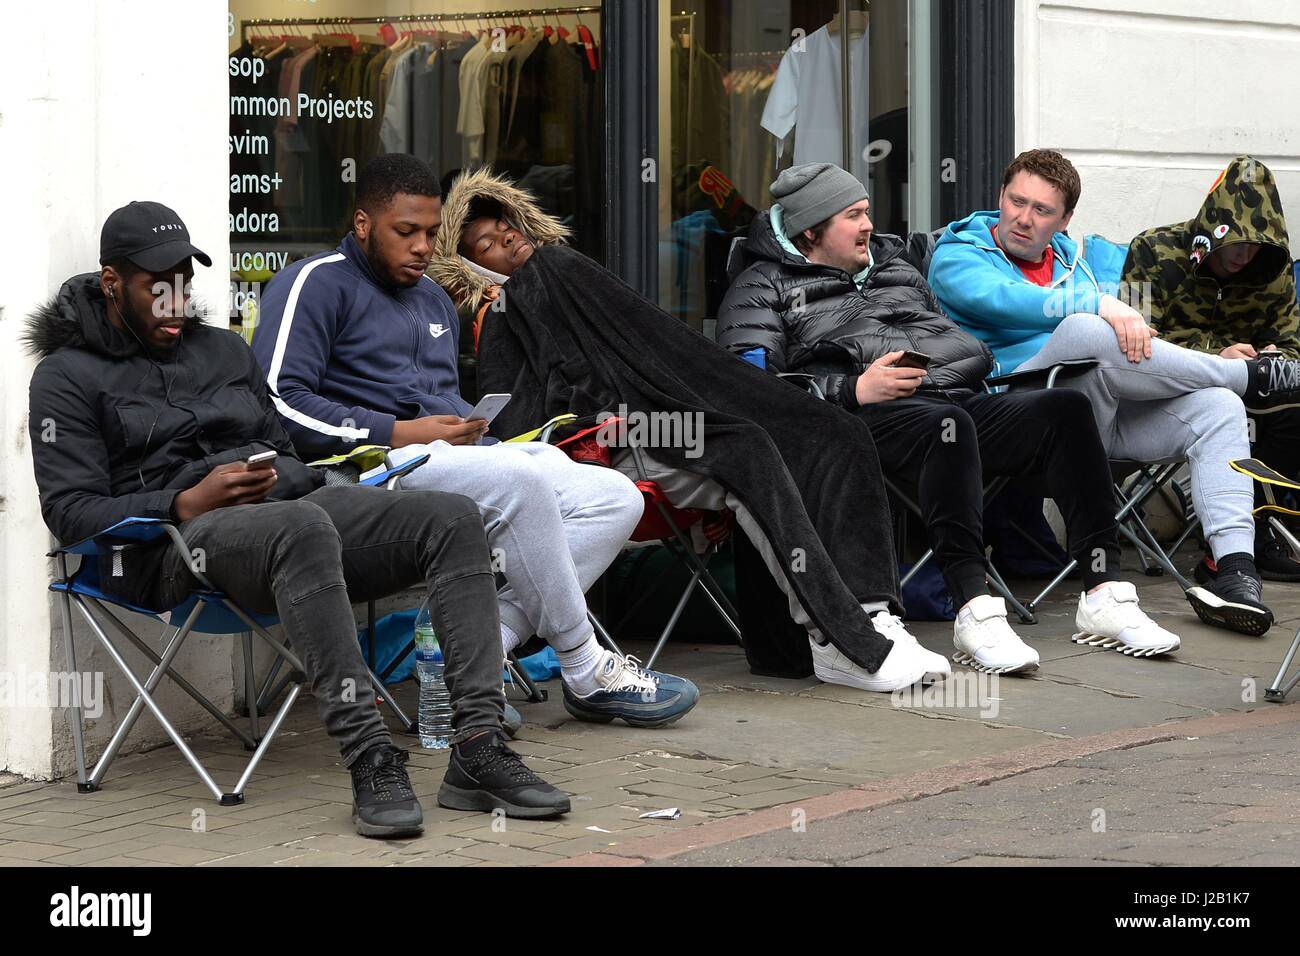 Fans camp outside fashion retailer 18montrose in Nottingham for the Adidas  Yeezy Boost 350 V2 trainers, the latest footwear to be released by American  rap star Kanye West and Adidas, which go